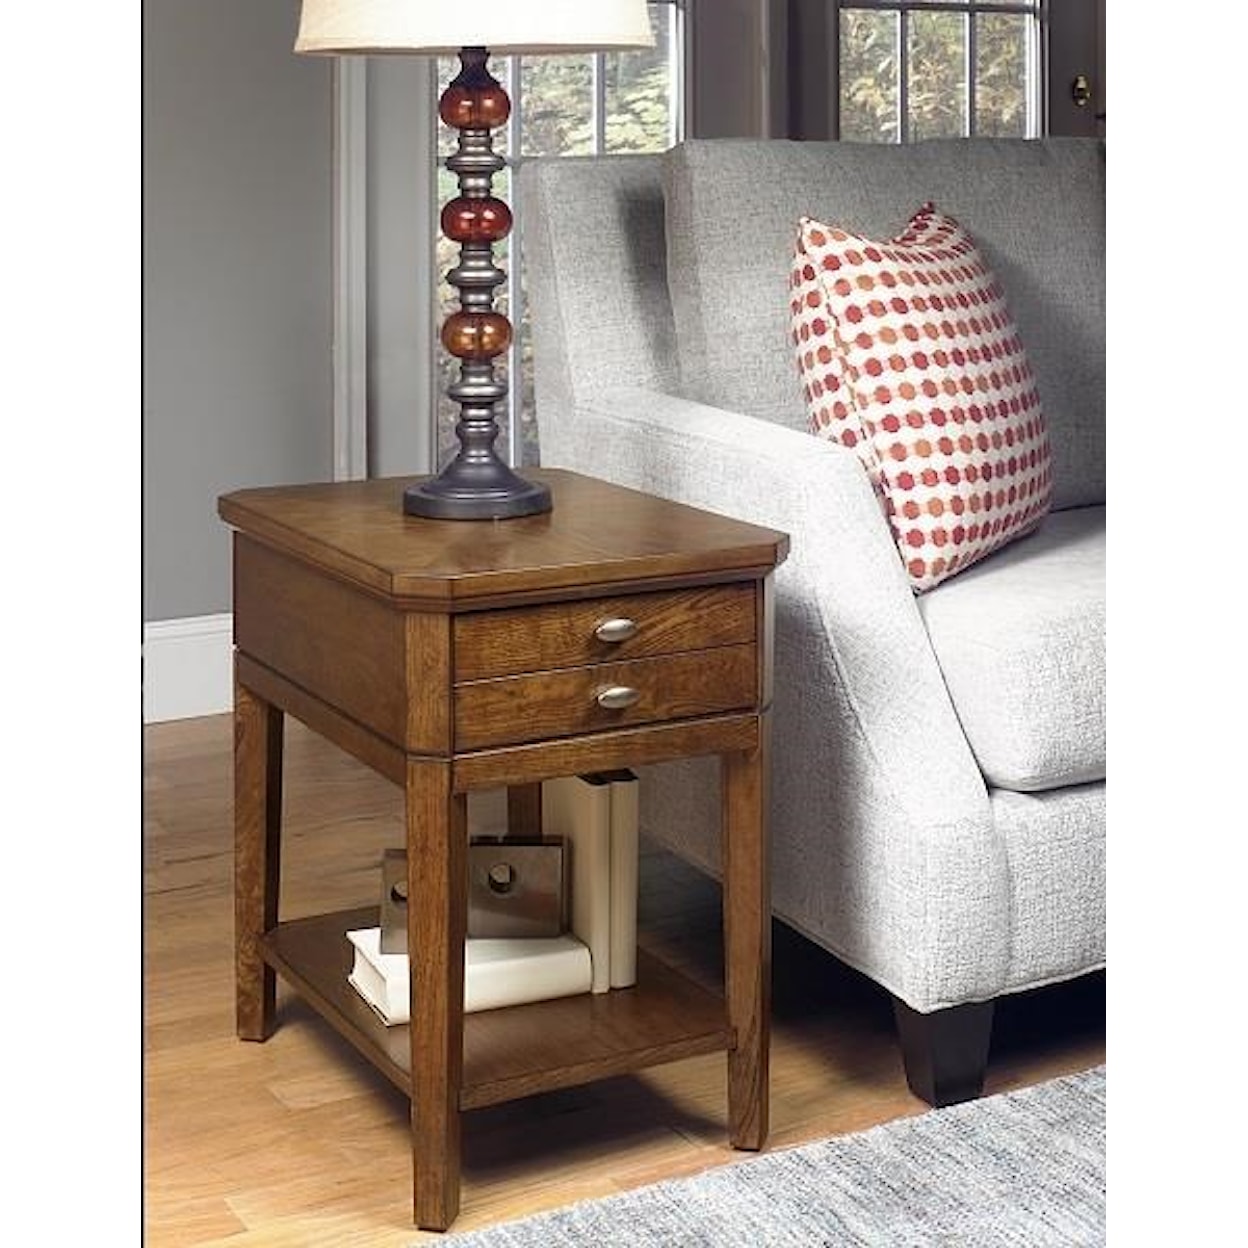 Null Furniture 2016 Rectangular End Table